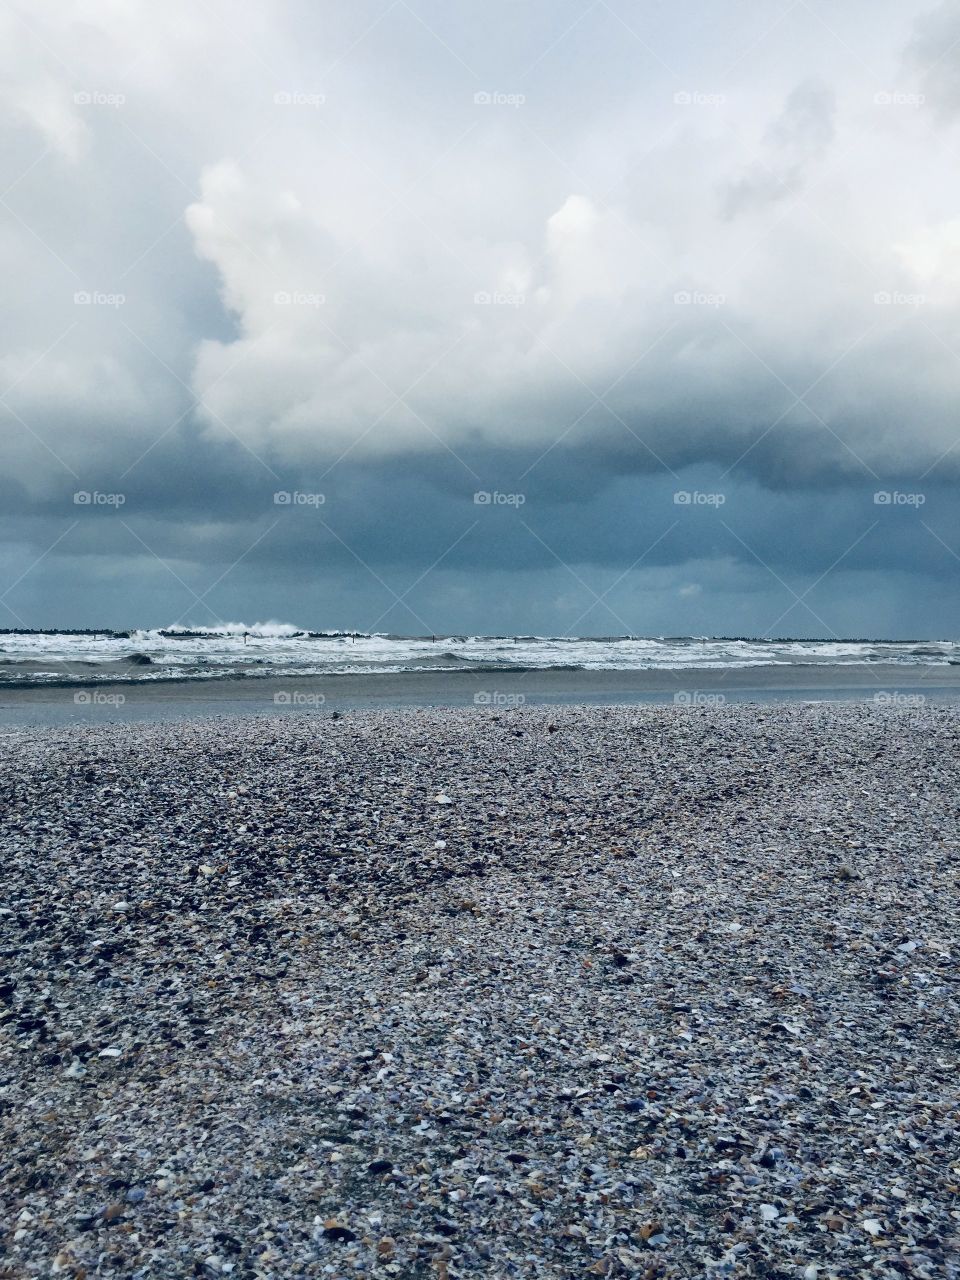 What a mix between those amazing clouds and the sea and the seashells in December 2019